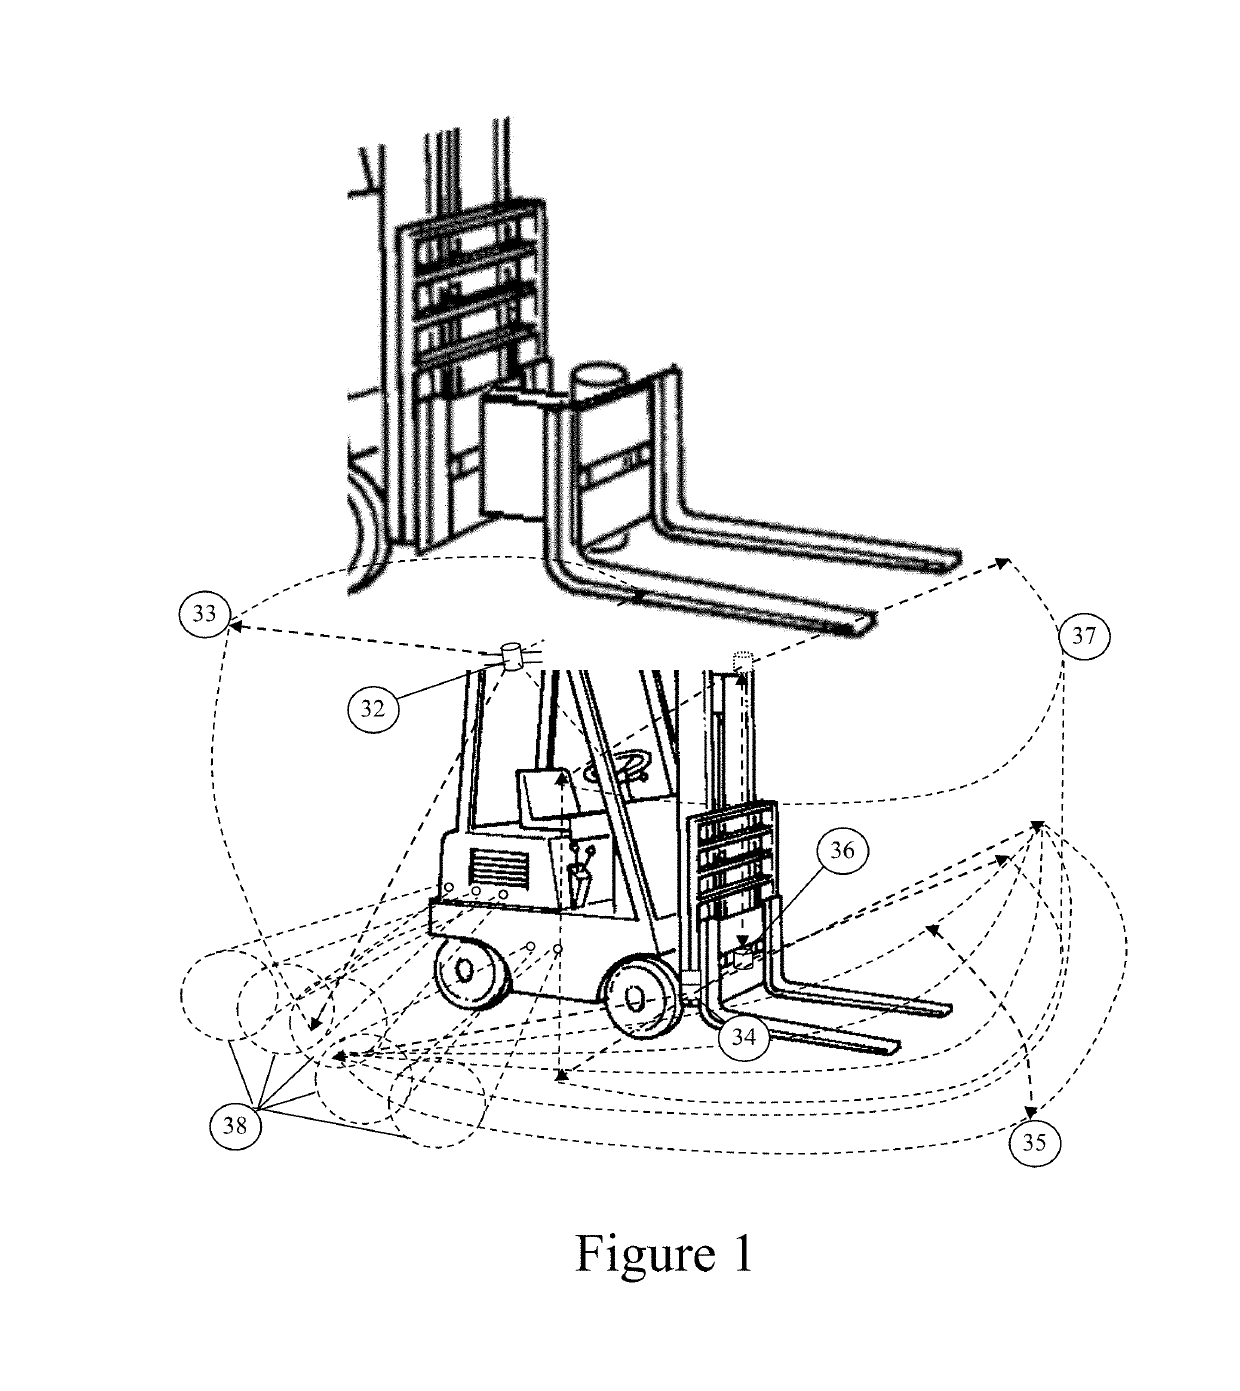 Path and load localization and operations supporting automated warehousing using robotic forklifts or other material handling vehicles